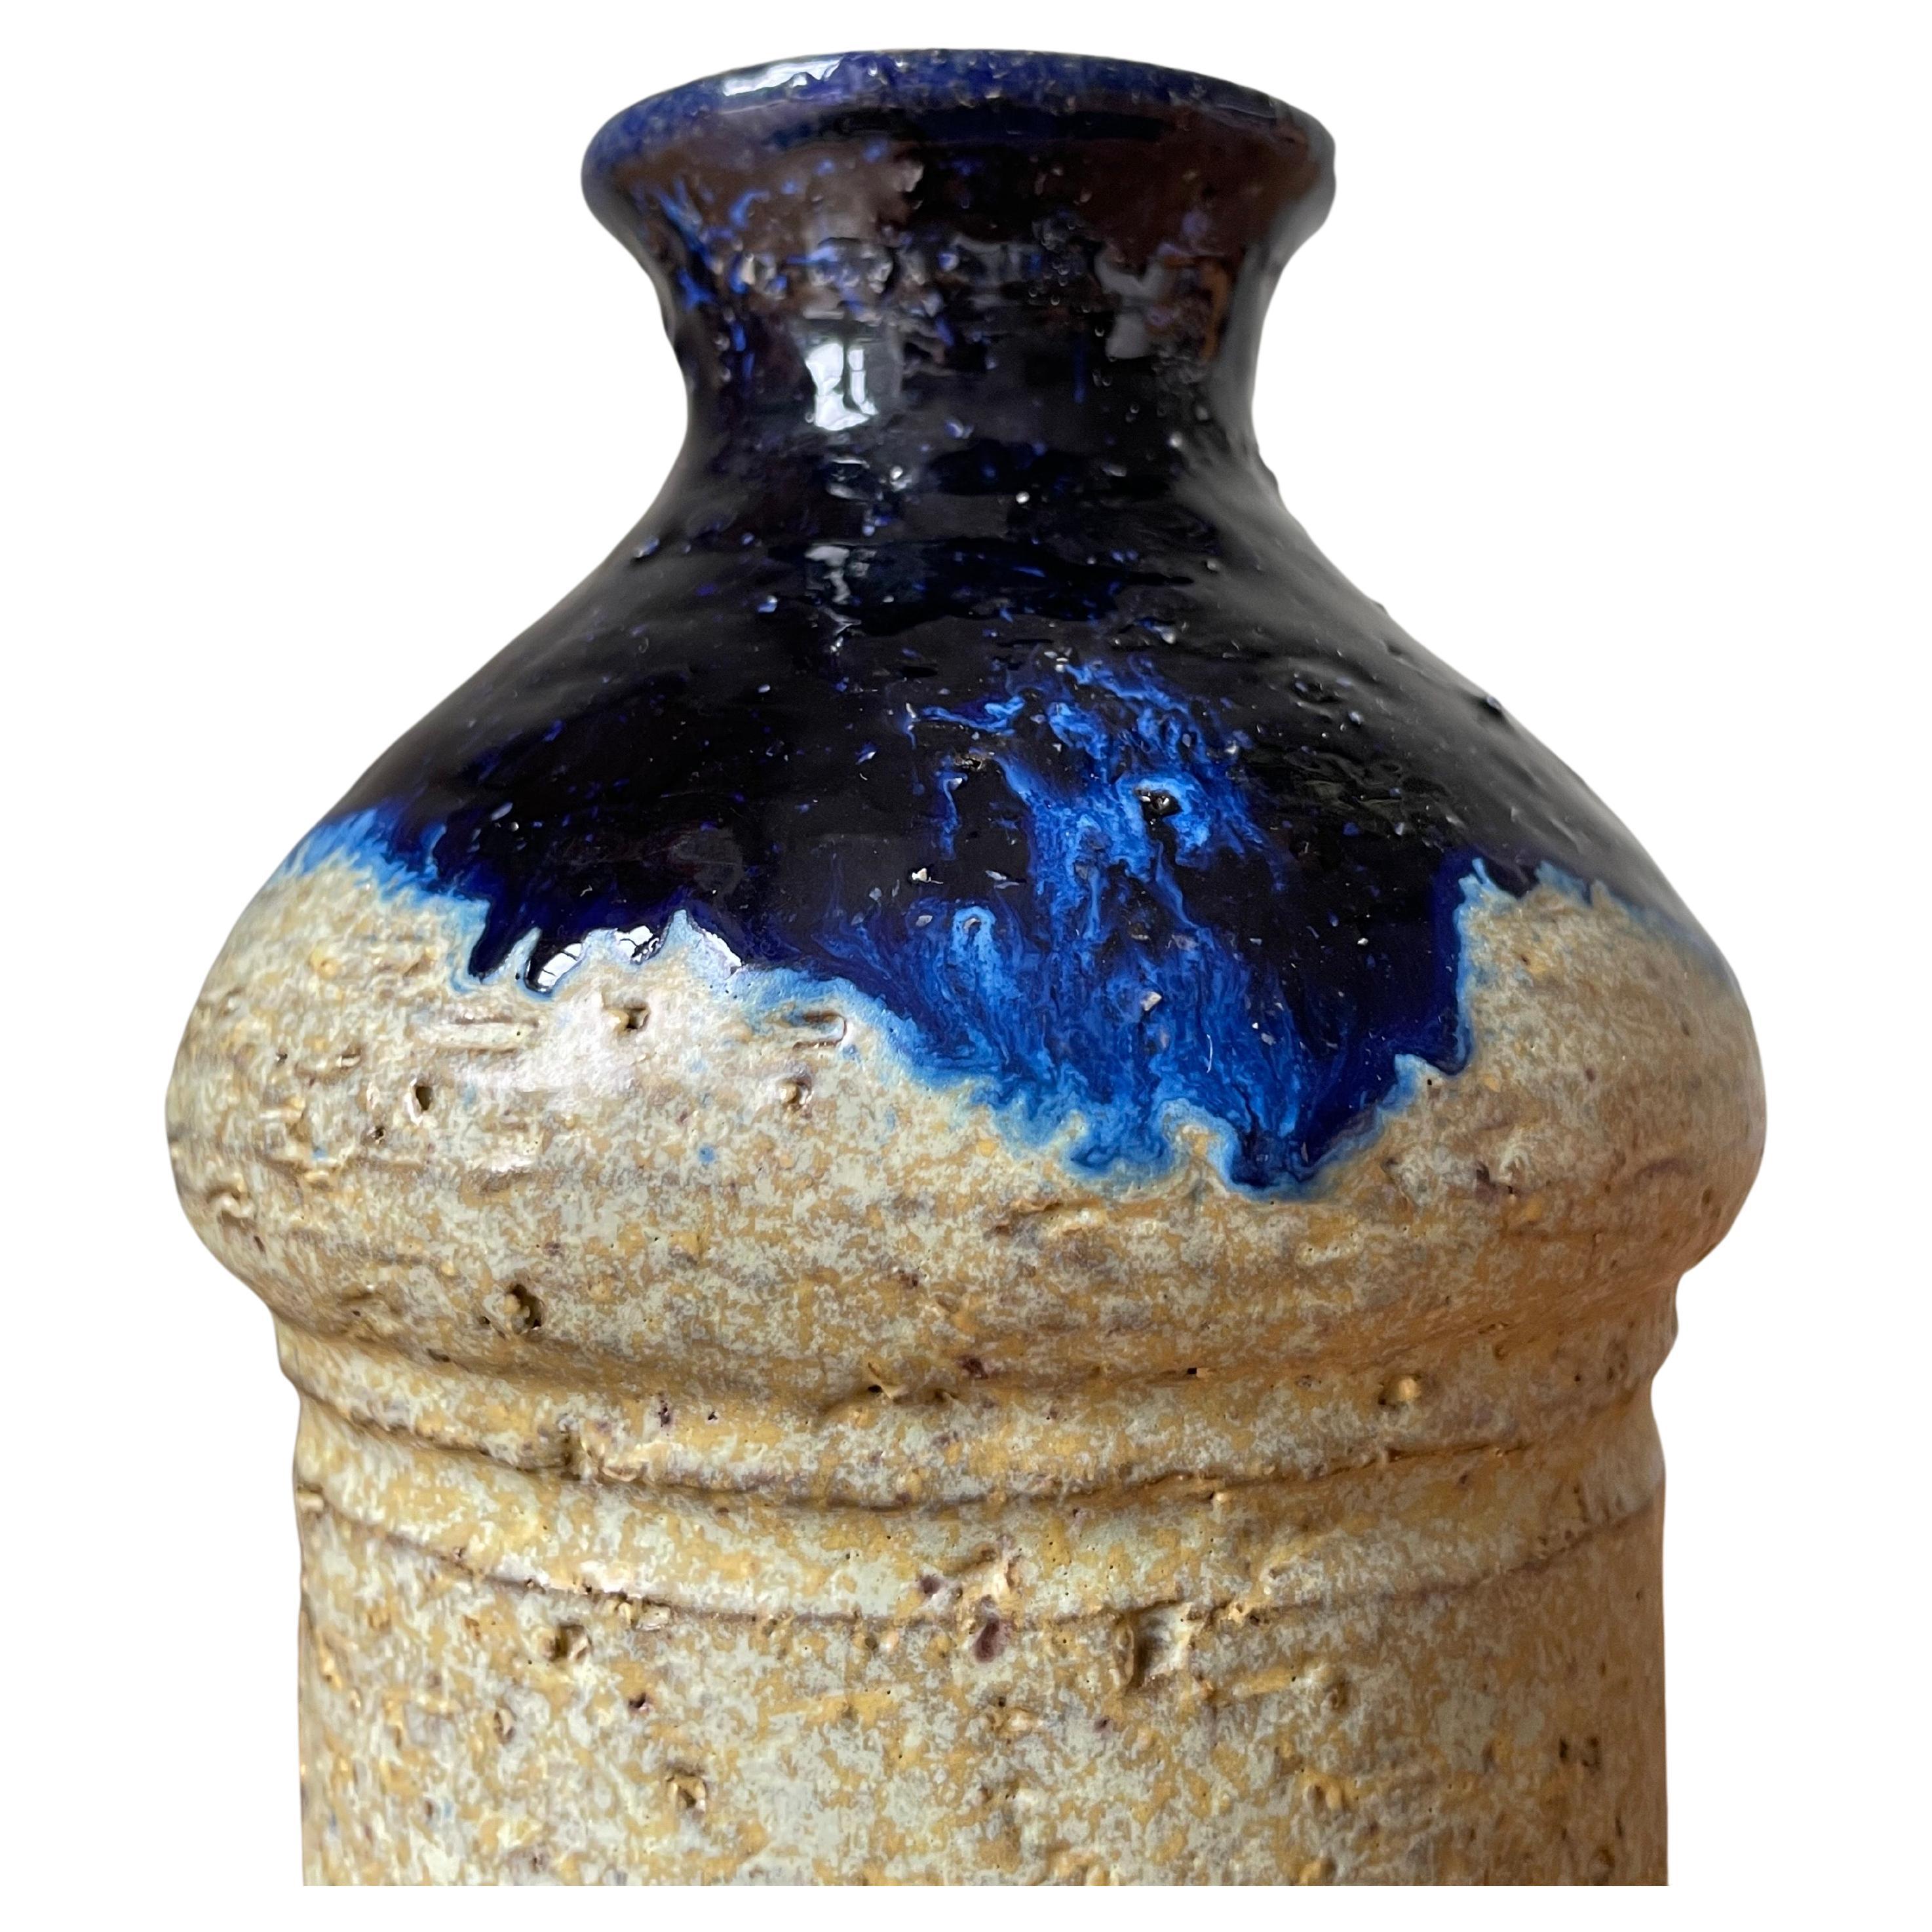 Curved rustic ceramic vase with sand colored cylinder shaped body. The rounded top has shiny dark blue running glaze while the base is left raw and unglazed. Manufactured in Denmark in the 1960s. Beautiful vintage condition. 
Denmark, 1960s. 